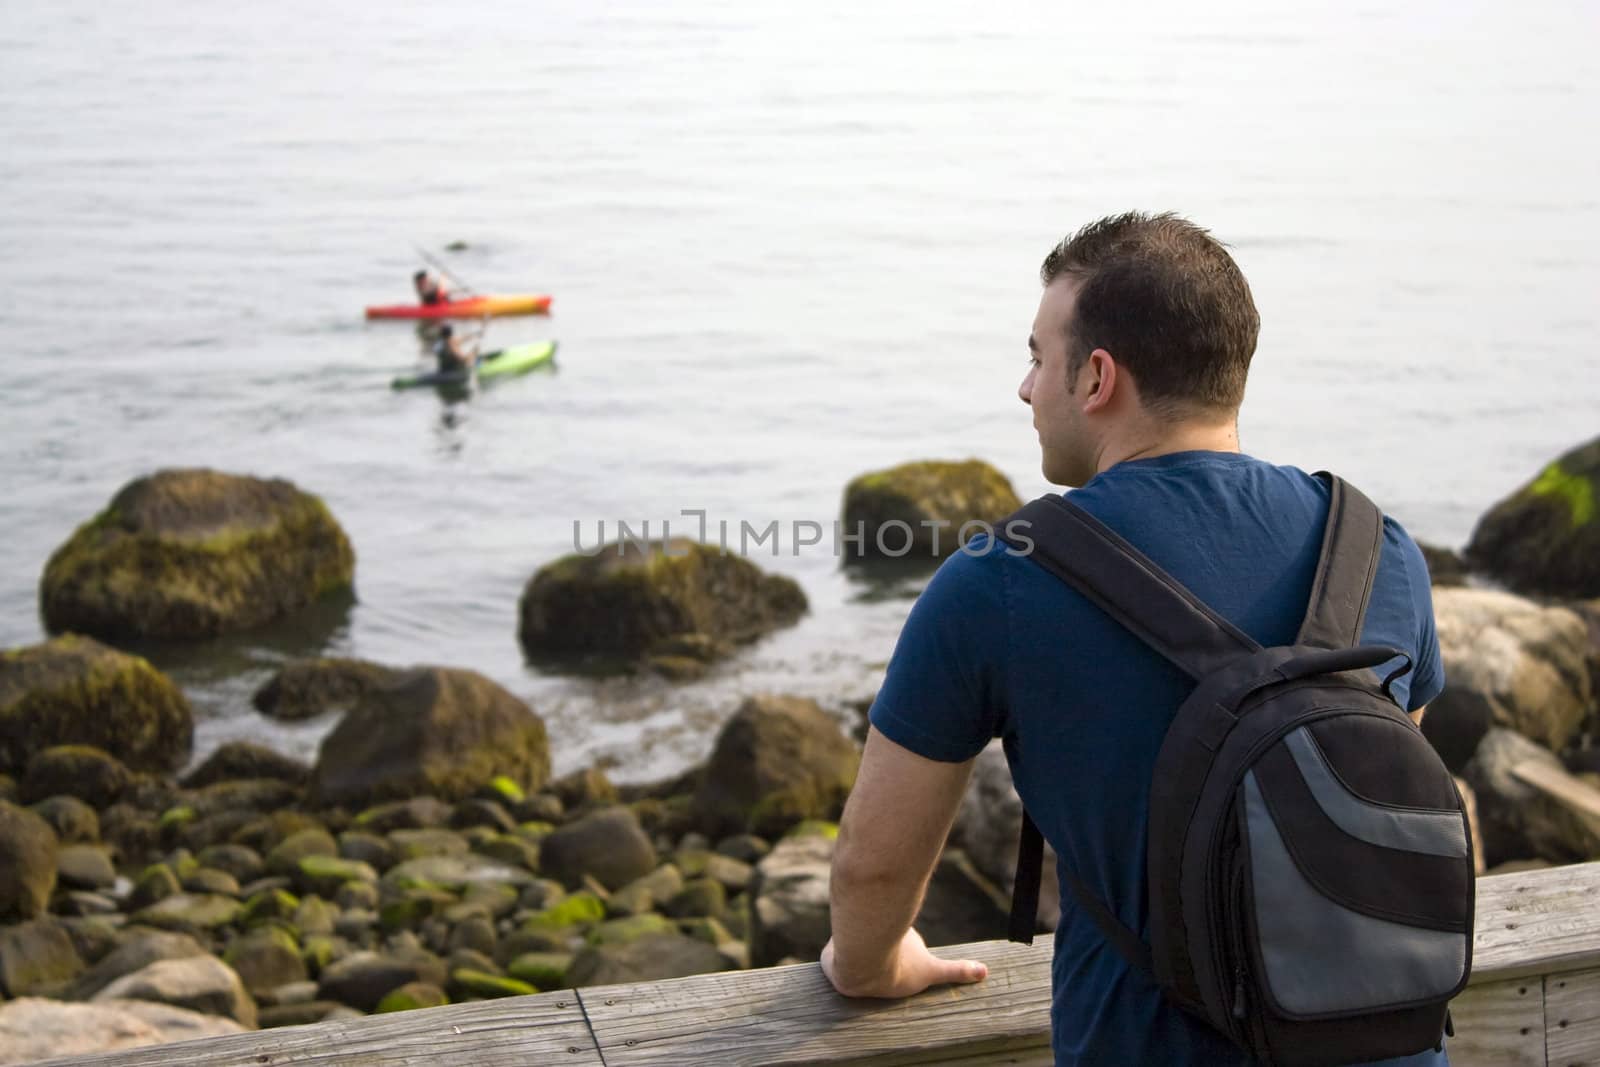 A young man enjoys the view by the sea as two people kayak in the distance.  Shallow depth of field.